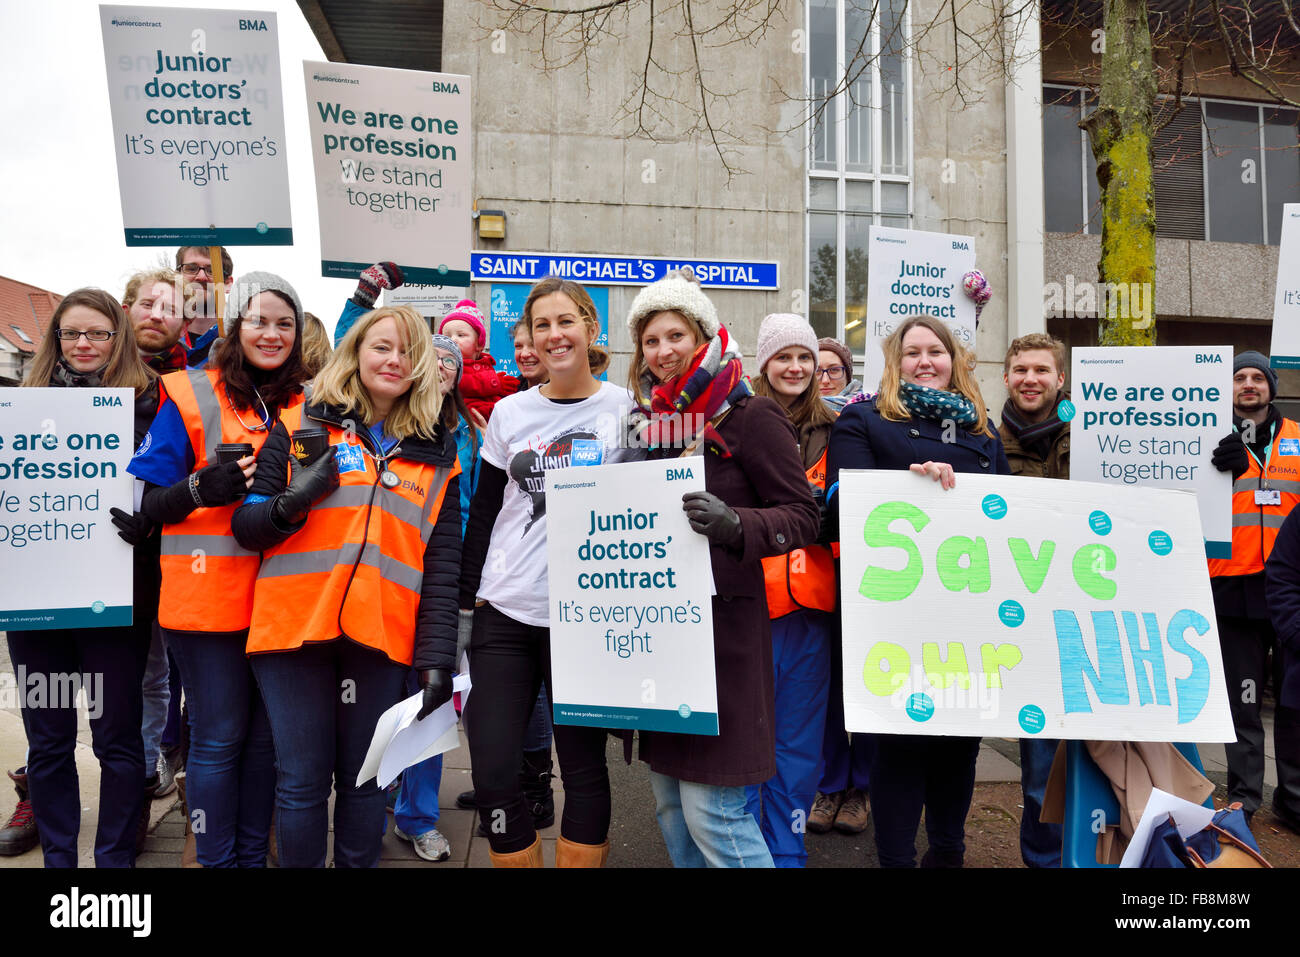 Bristol, England, UK 12 January 2016. Demonstration of Junior Doctors in strike with National Health Service (NHS) and government. The demonstrating doctors emphasizing the worry about new contract which could push them into longer working hours putting patients as risk due to doctors being tired. Demonstrating in front of Saint Michael's Maternity Hospital, The Bristol Royal Hospital for Sick Children. Credit:  Charles Stirling/Alamy Live News Stock Photo